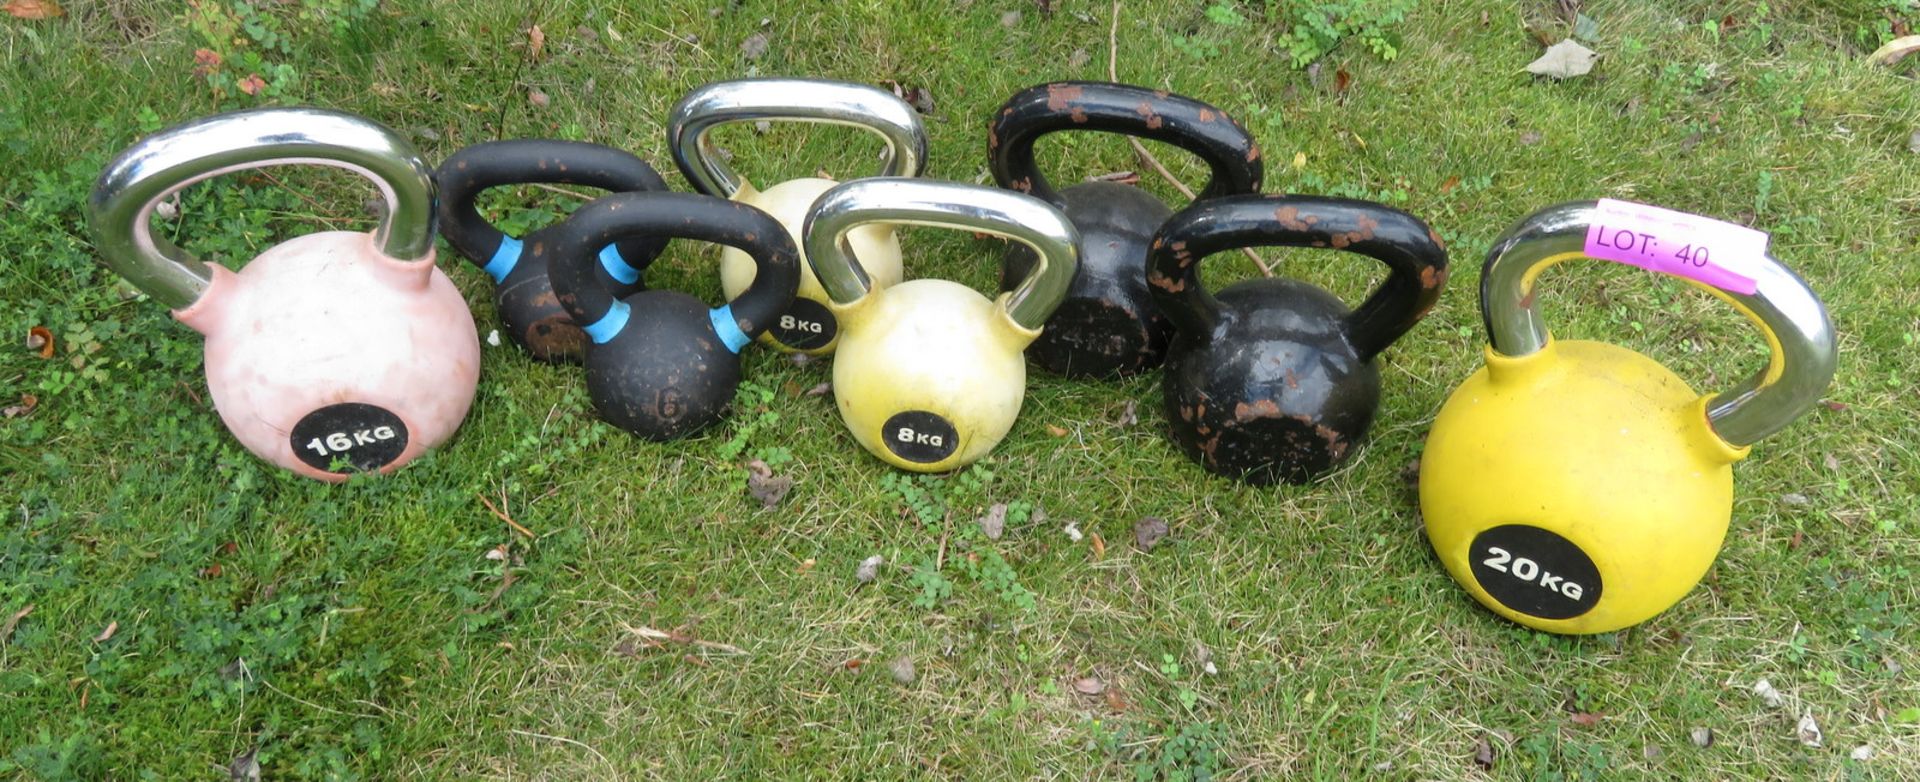 8 Kettle Bells Sizes Range From 6kg - 20kg Weights Included: 2x 6kg, 2x 8kg, 2x 14kg, 1x 1